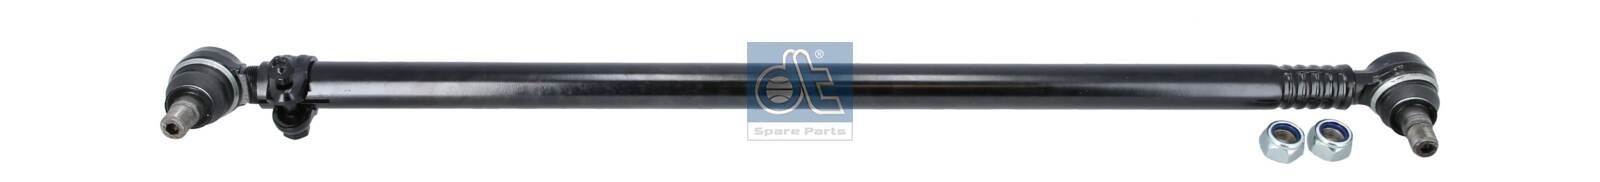 DT Spare Parts Centre Rod Assembly 3.63192 buy